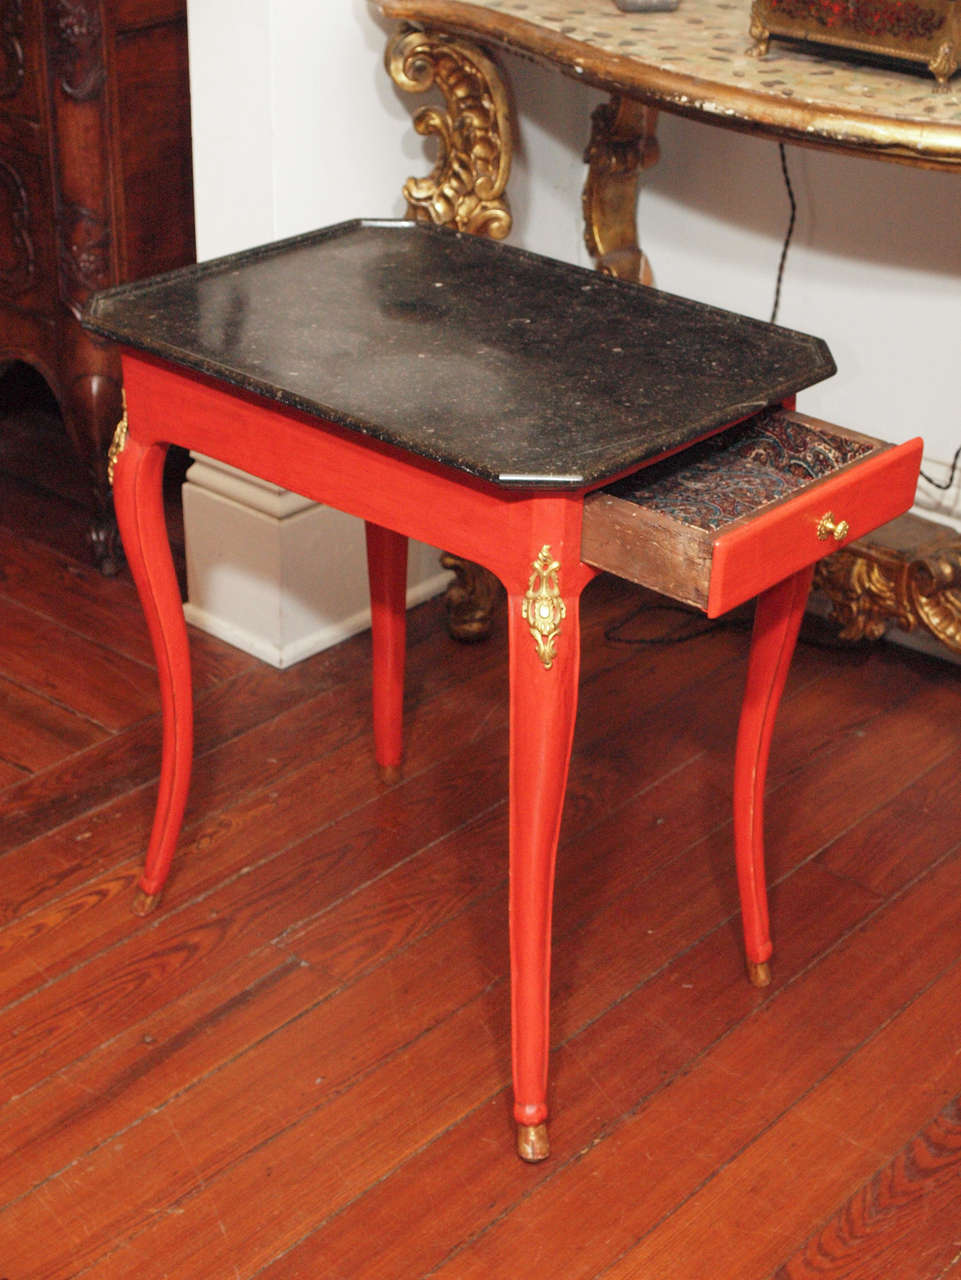 Louis XV transition Small Occasional Table with refreshed red paint and ormolu mounts, one drawer and a trayed fossilized marble top.